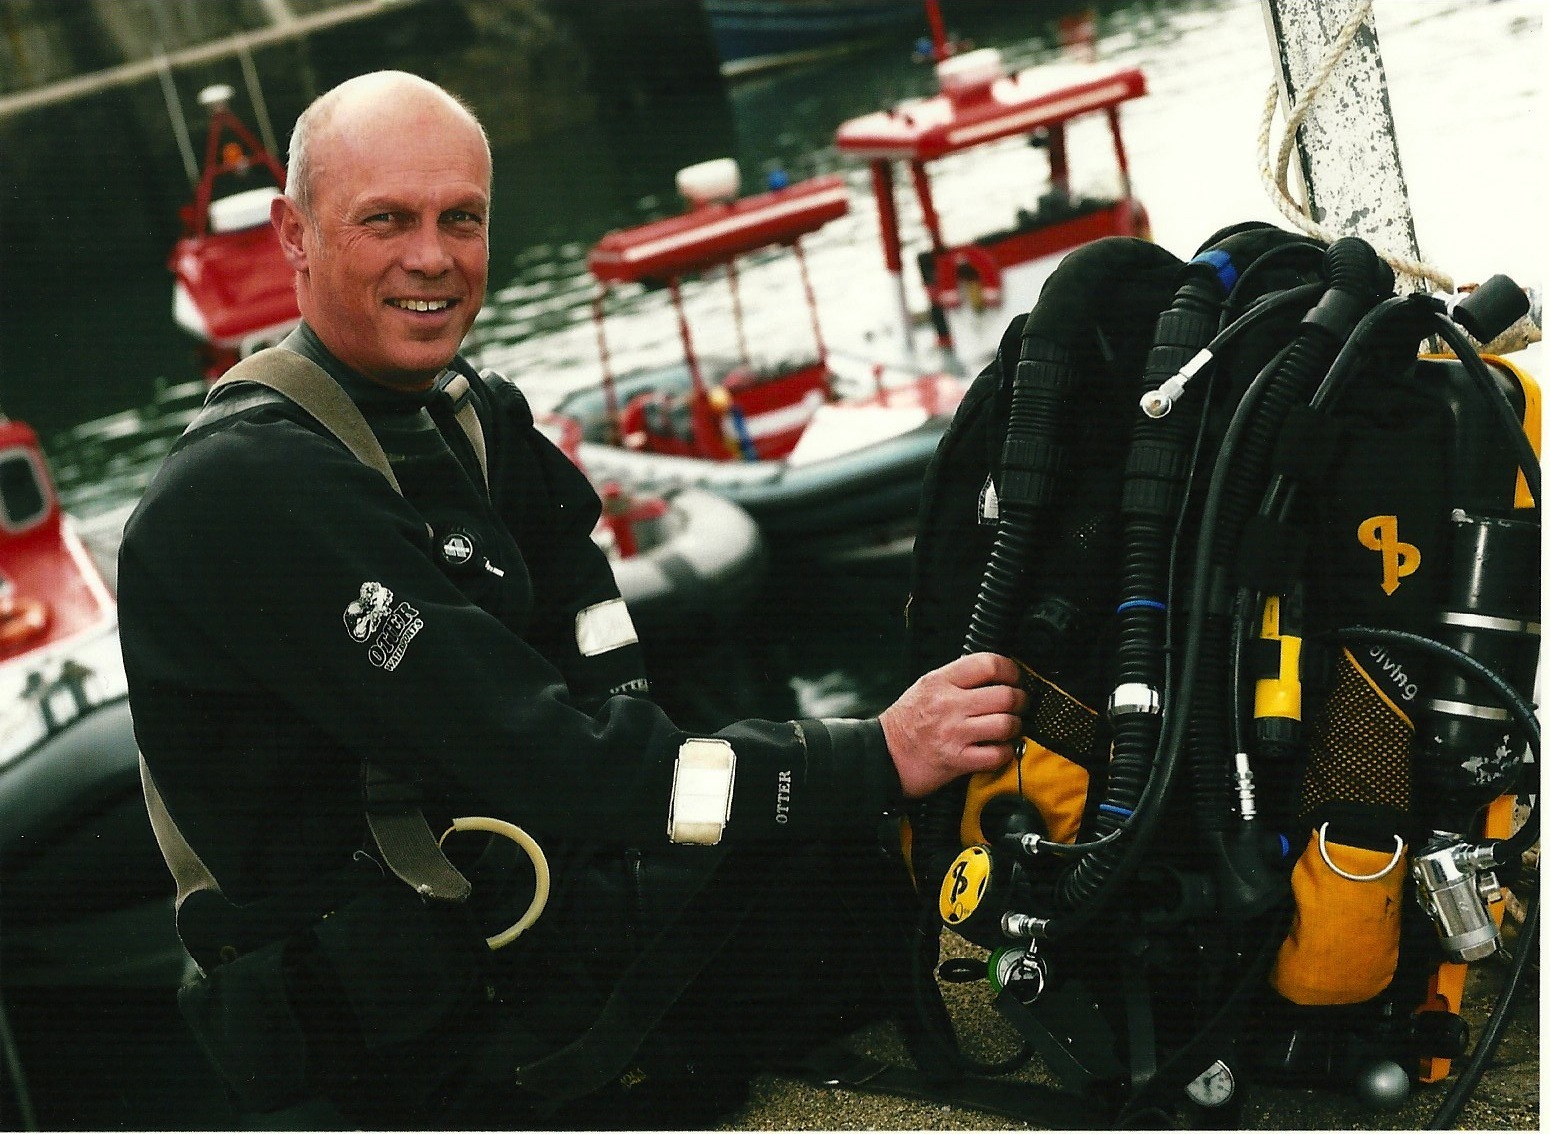 Technical diver Rod Macdonald led expedition to wreck of HMS Hampshire